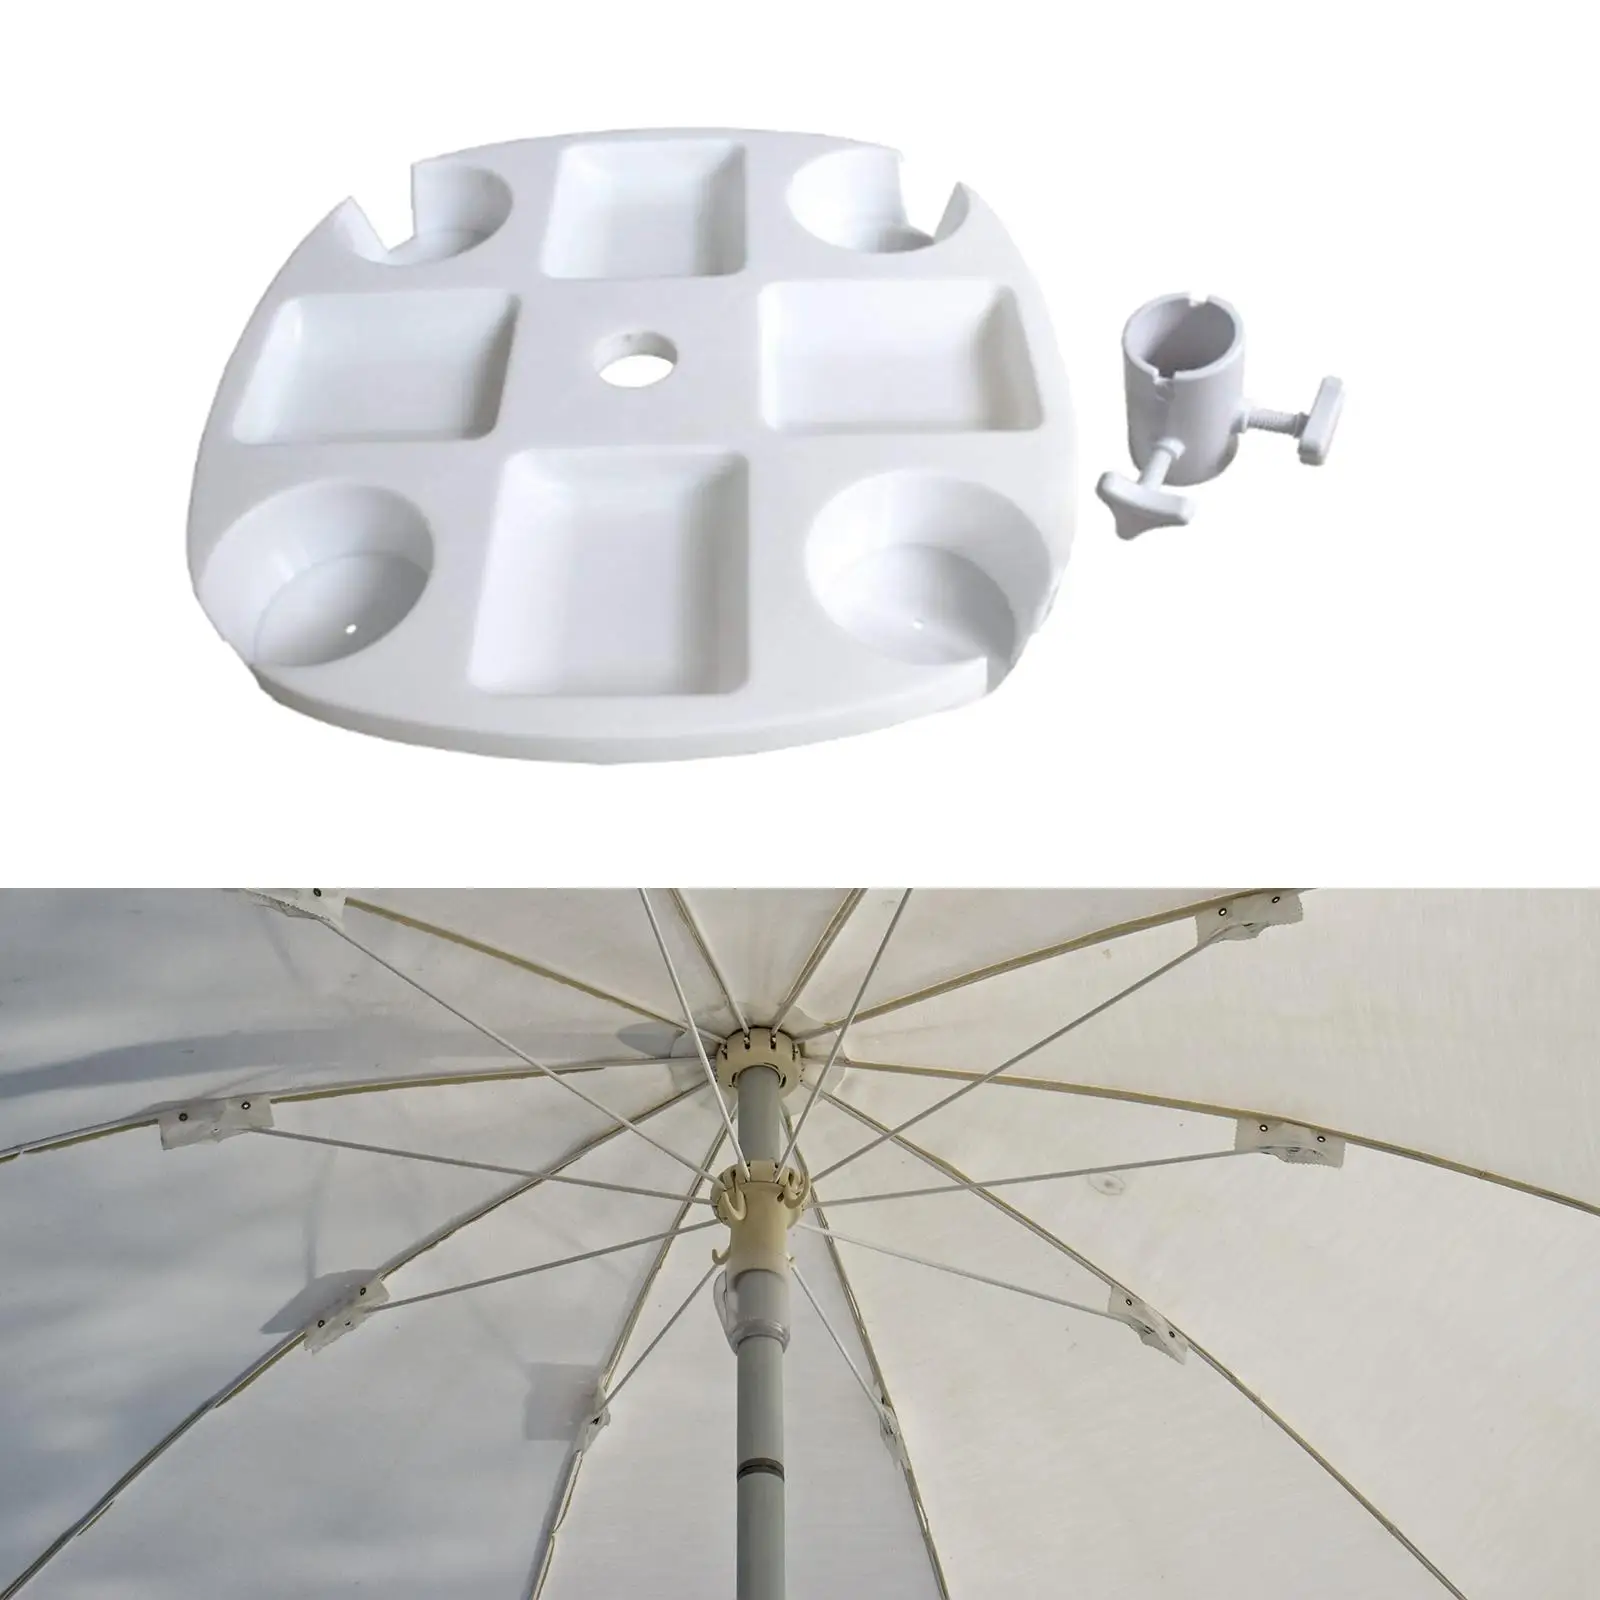 Summer Beach Umbrella Table Tray 4 Snack Compartments Outdoor Snack Drink Holder for Beach Swimming Pool Patio Garden